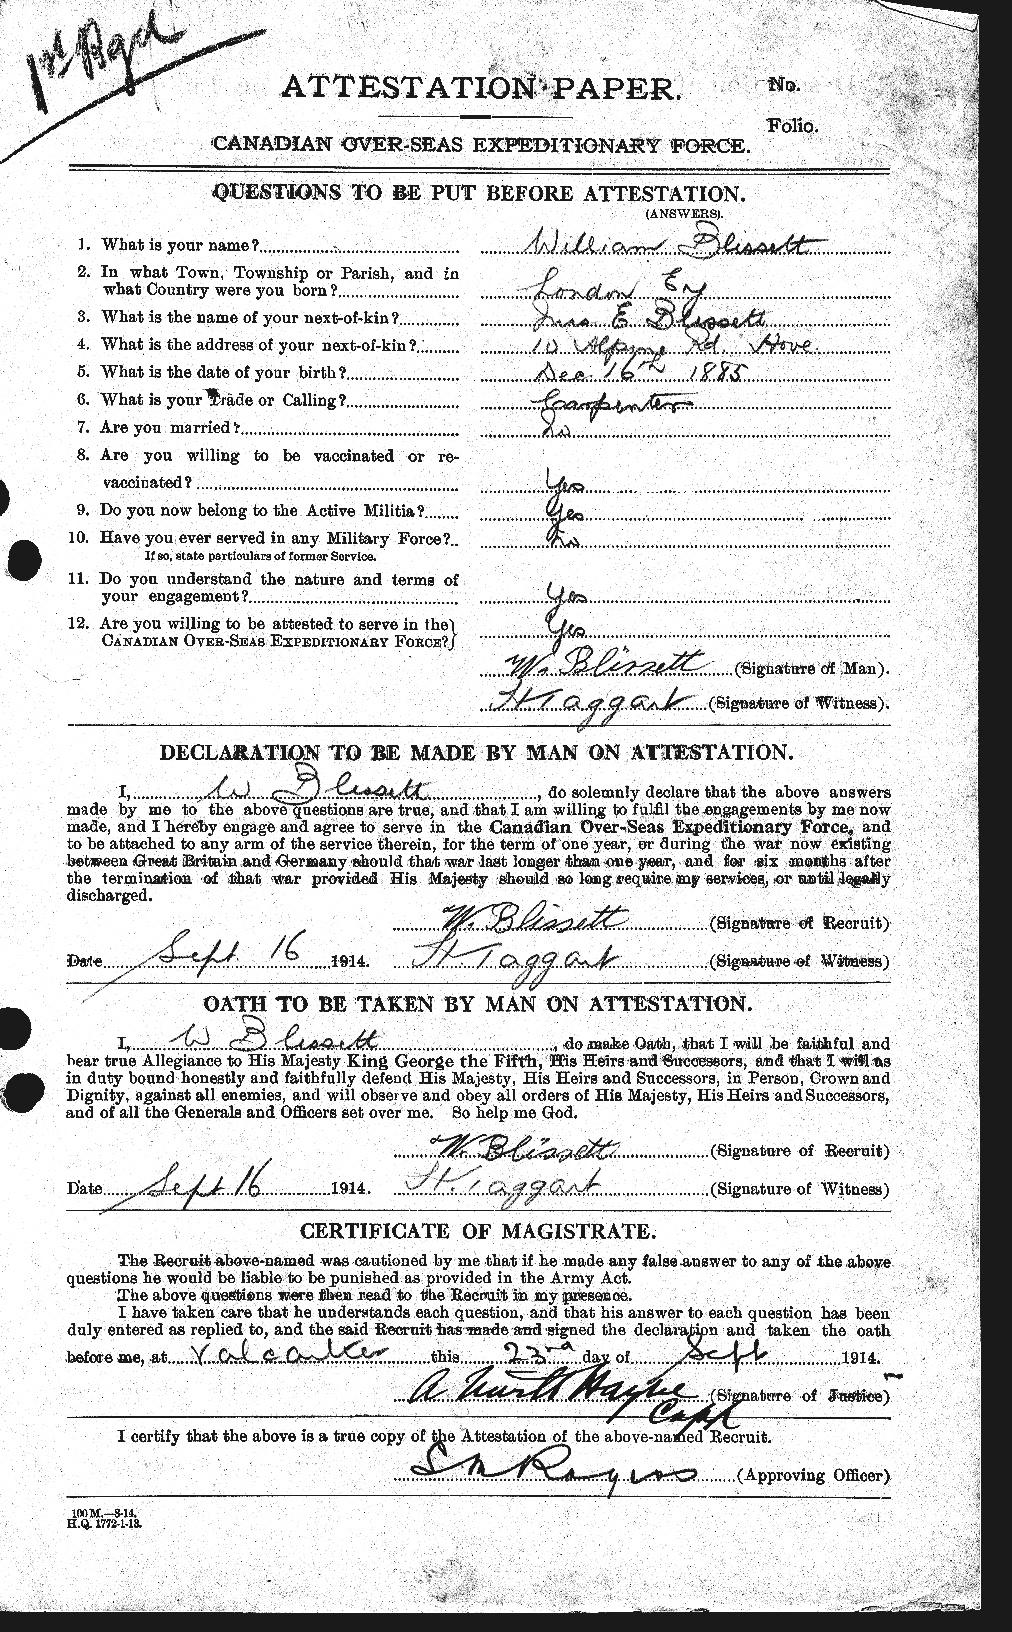 Personnel Records of the First World War - CEF 248386a